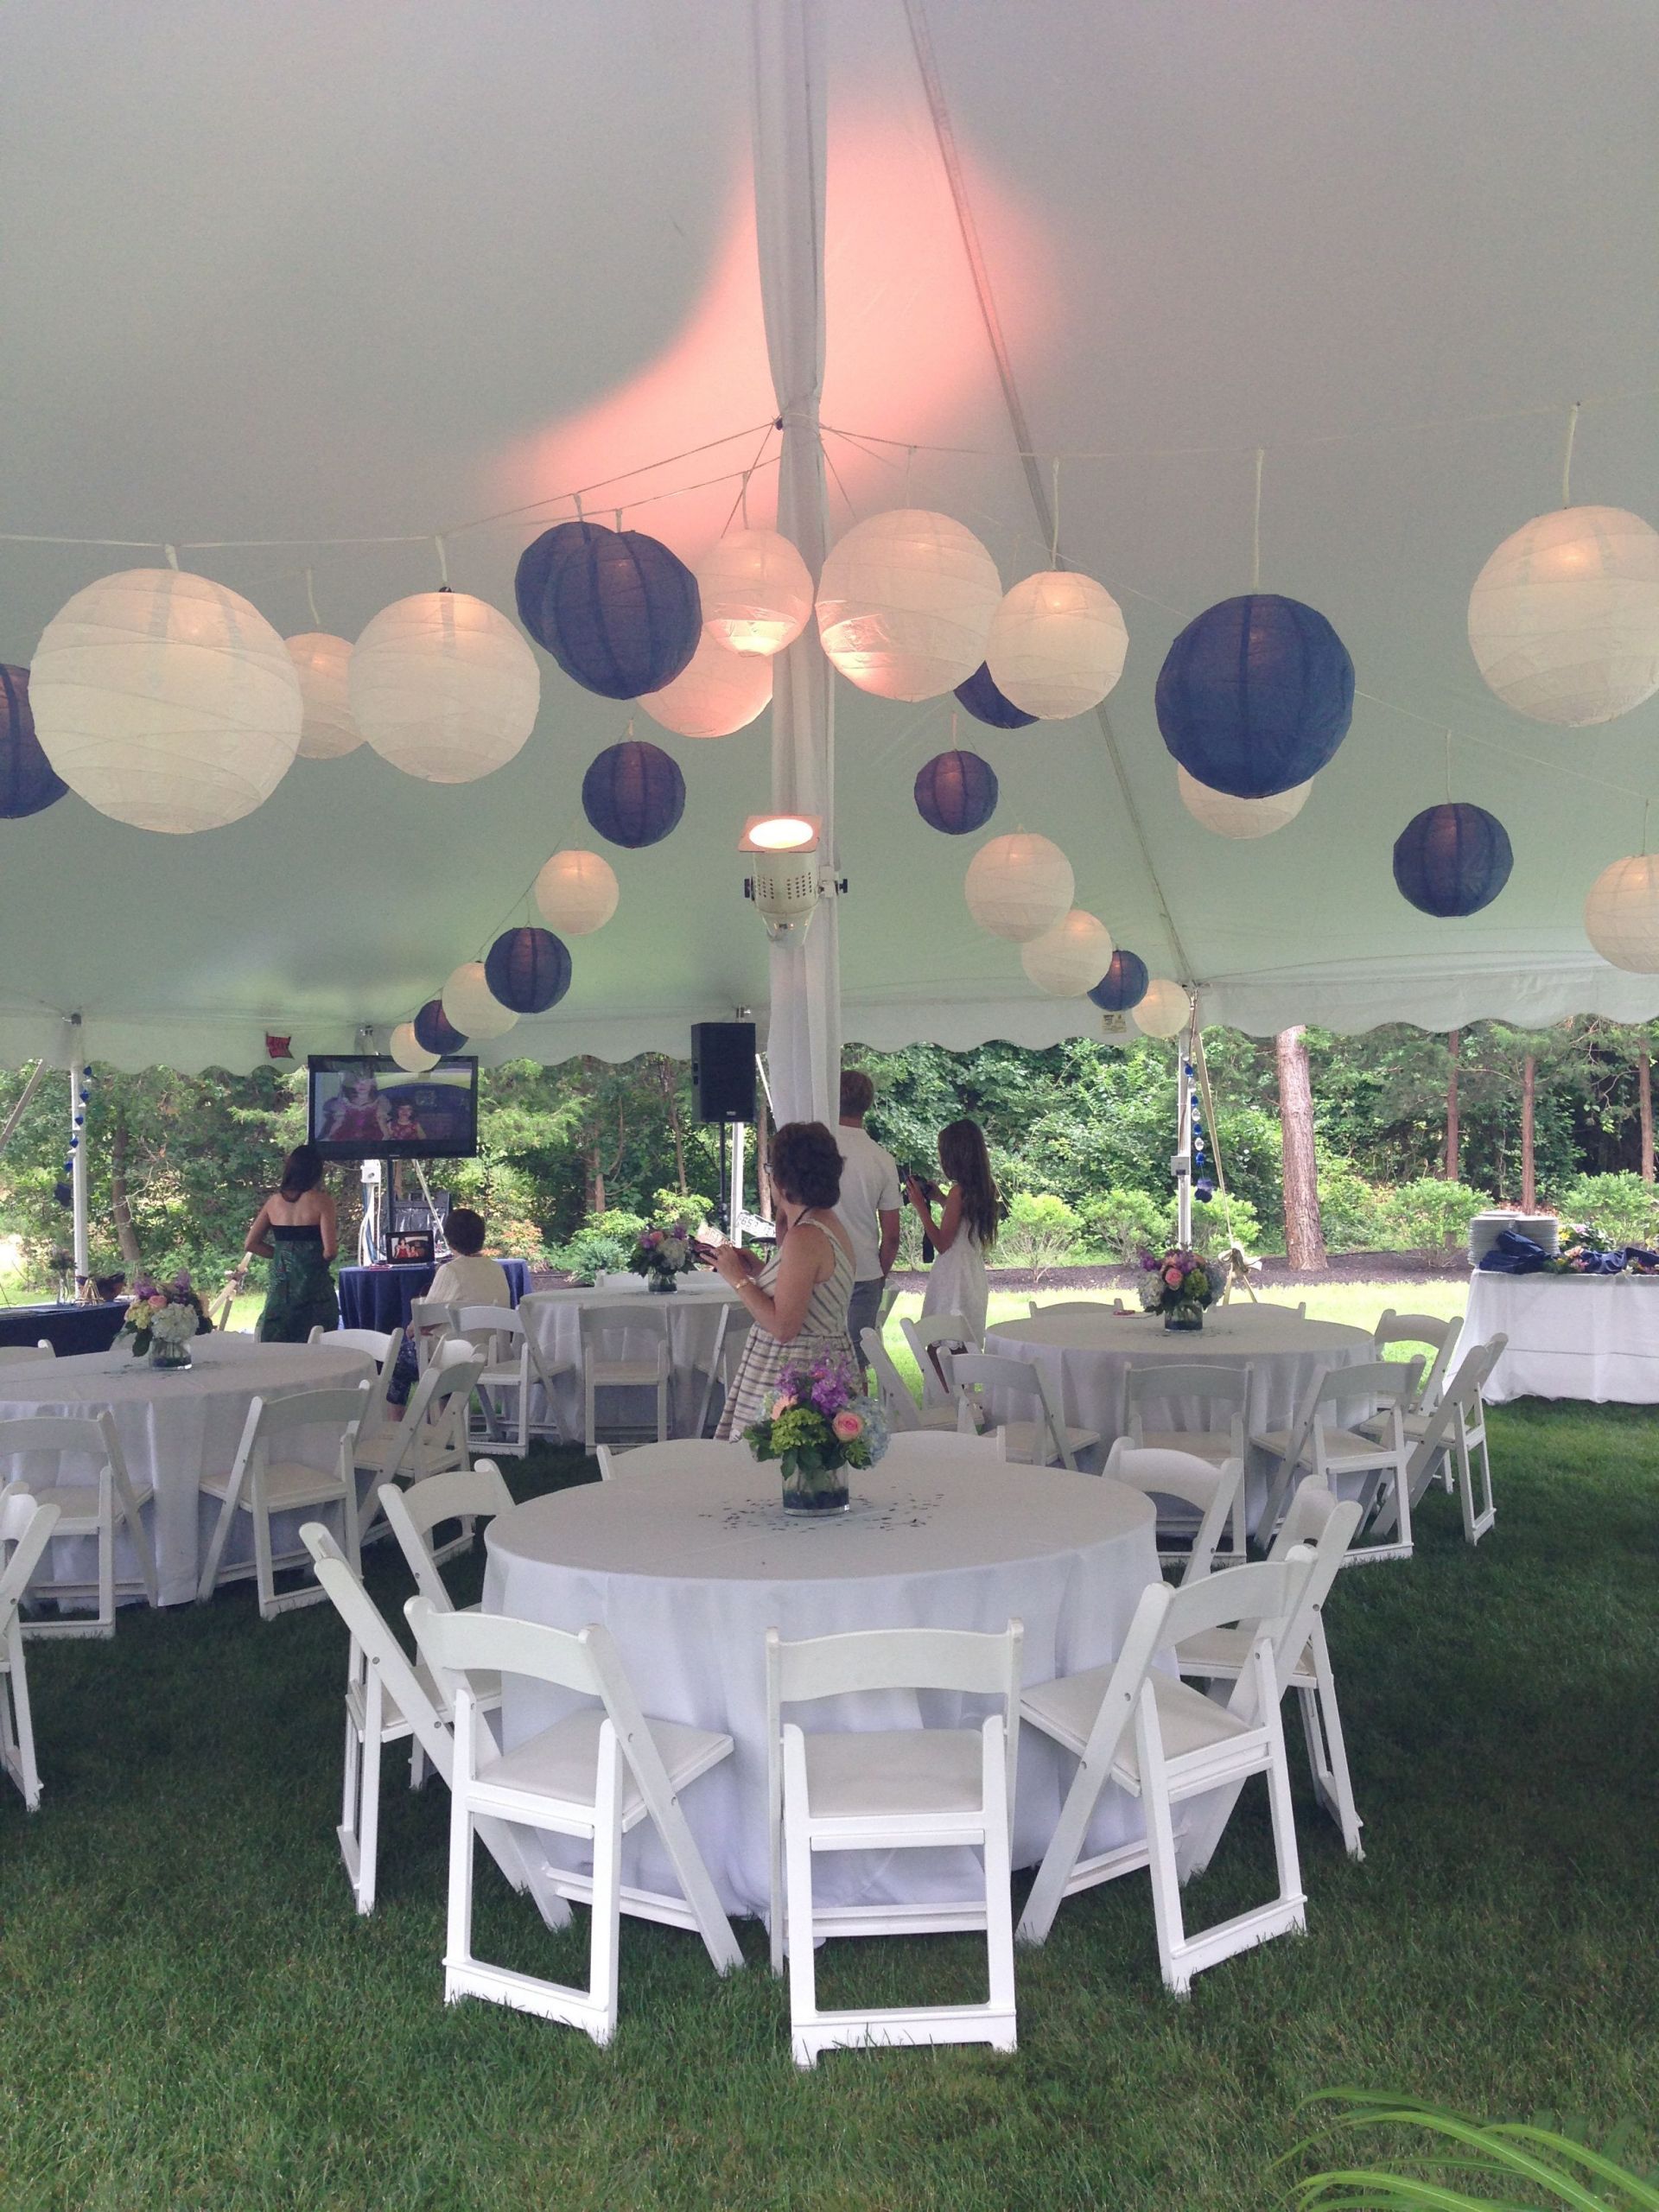 Table Decoration Ideas For High School Graduation Party
 Tented blue and white graduation party